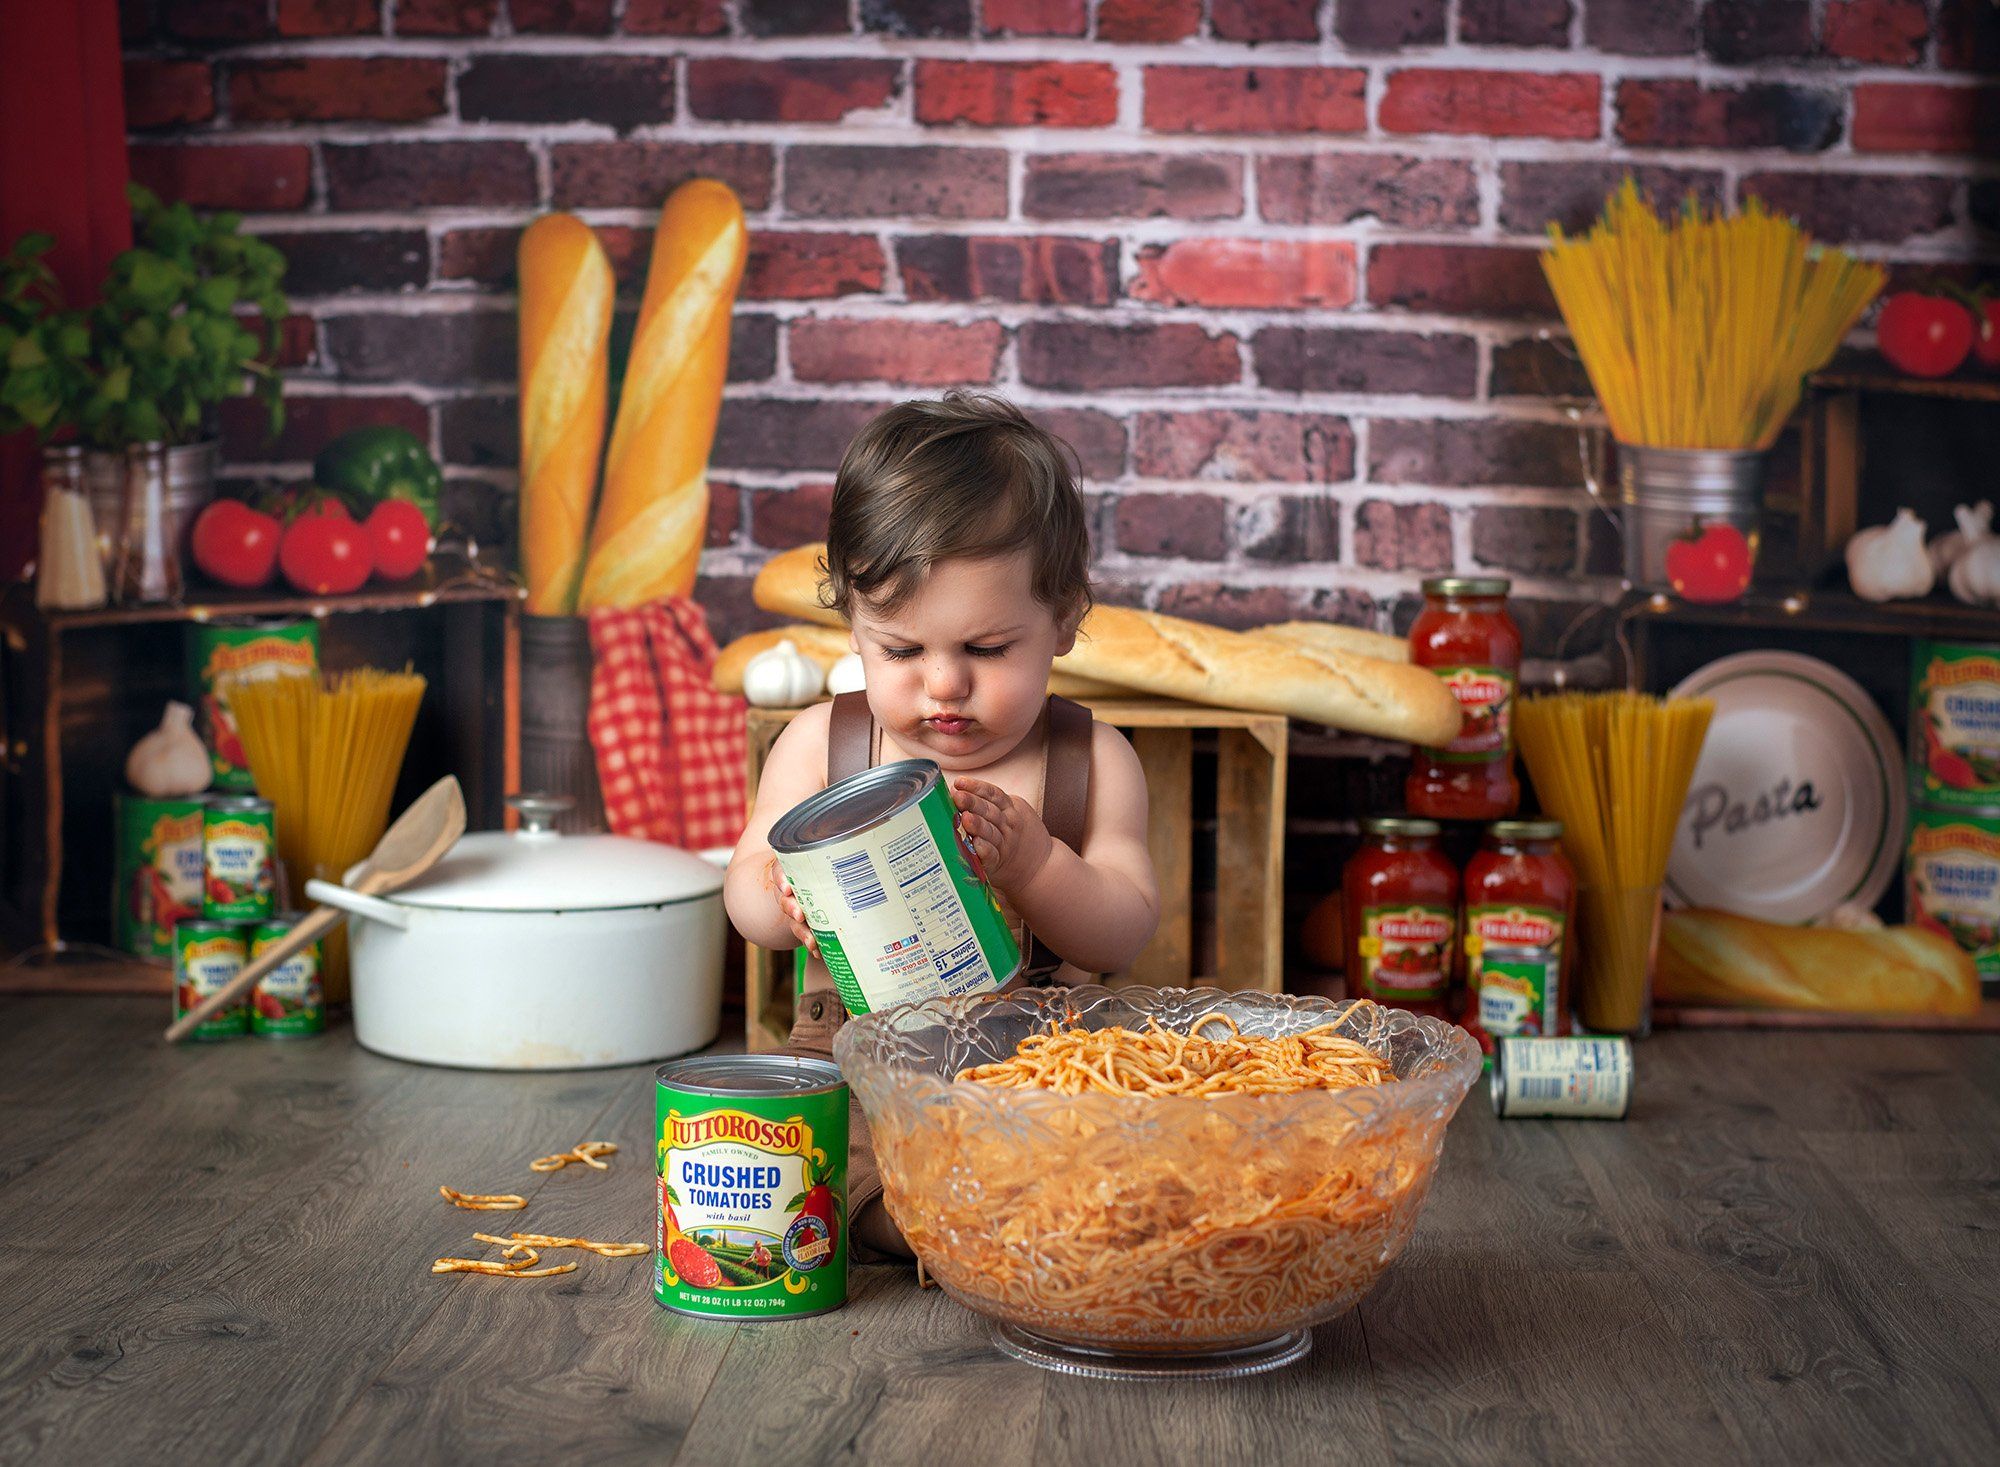 one year old boy playing with tomato cans while surrounded by pasta and sauce jars on a brick background